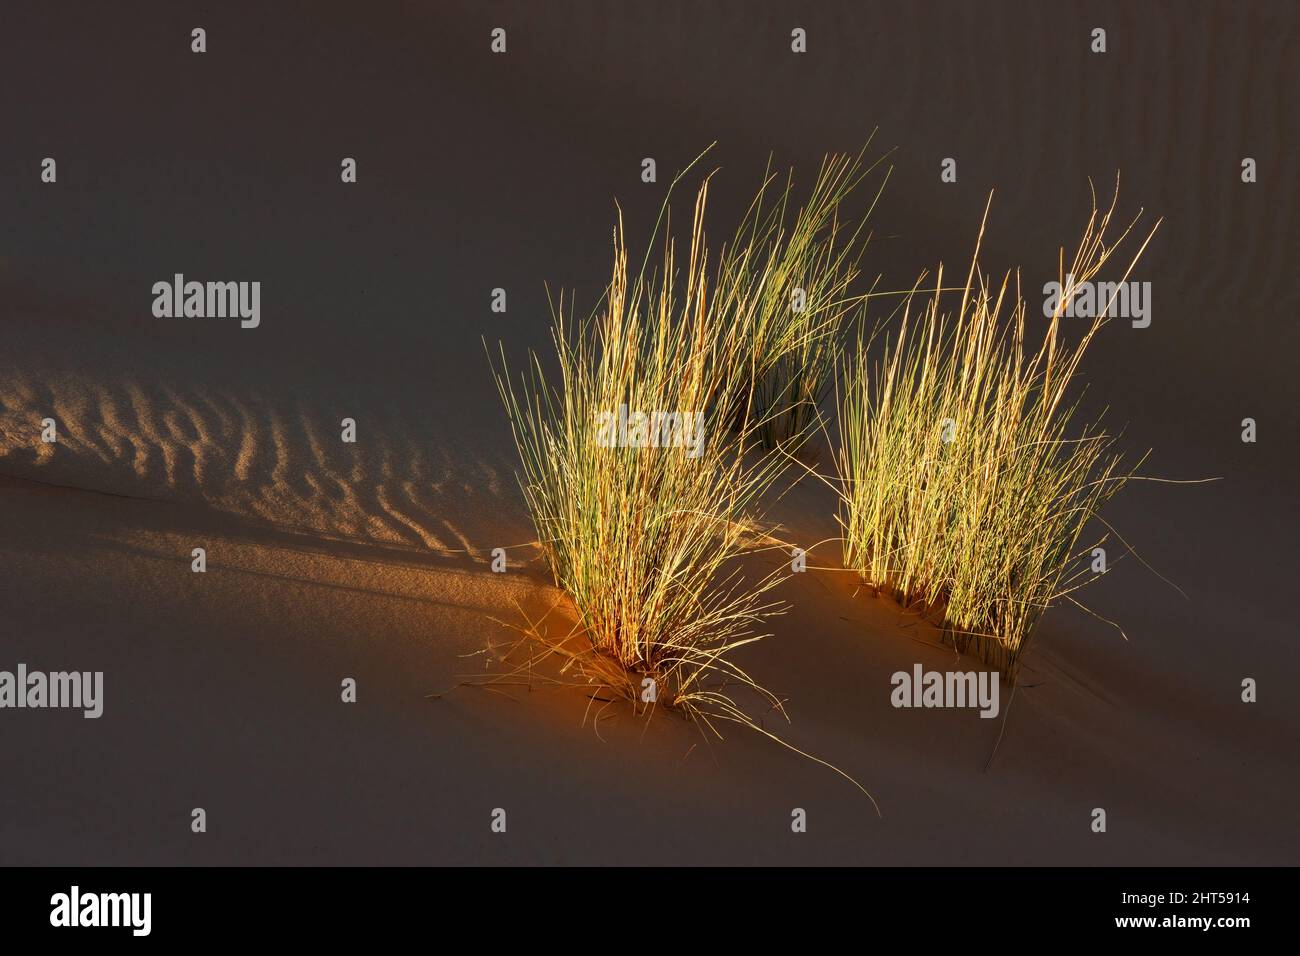 Grasses on a textured desert sand dune in late afternoon light, South Africa Stock Photo